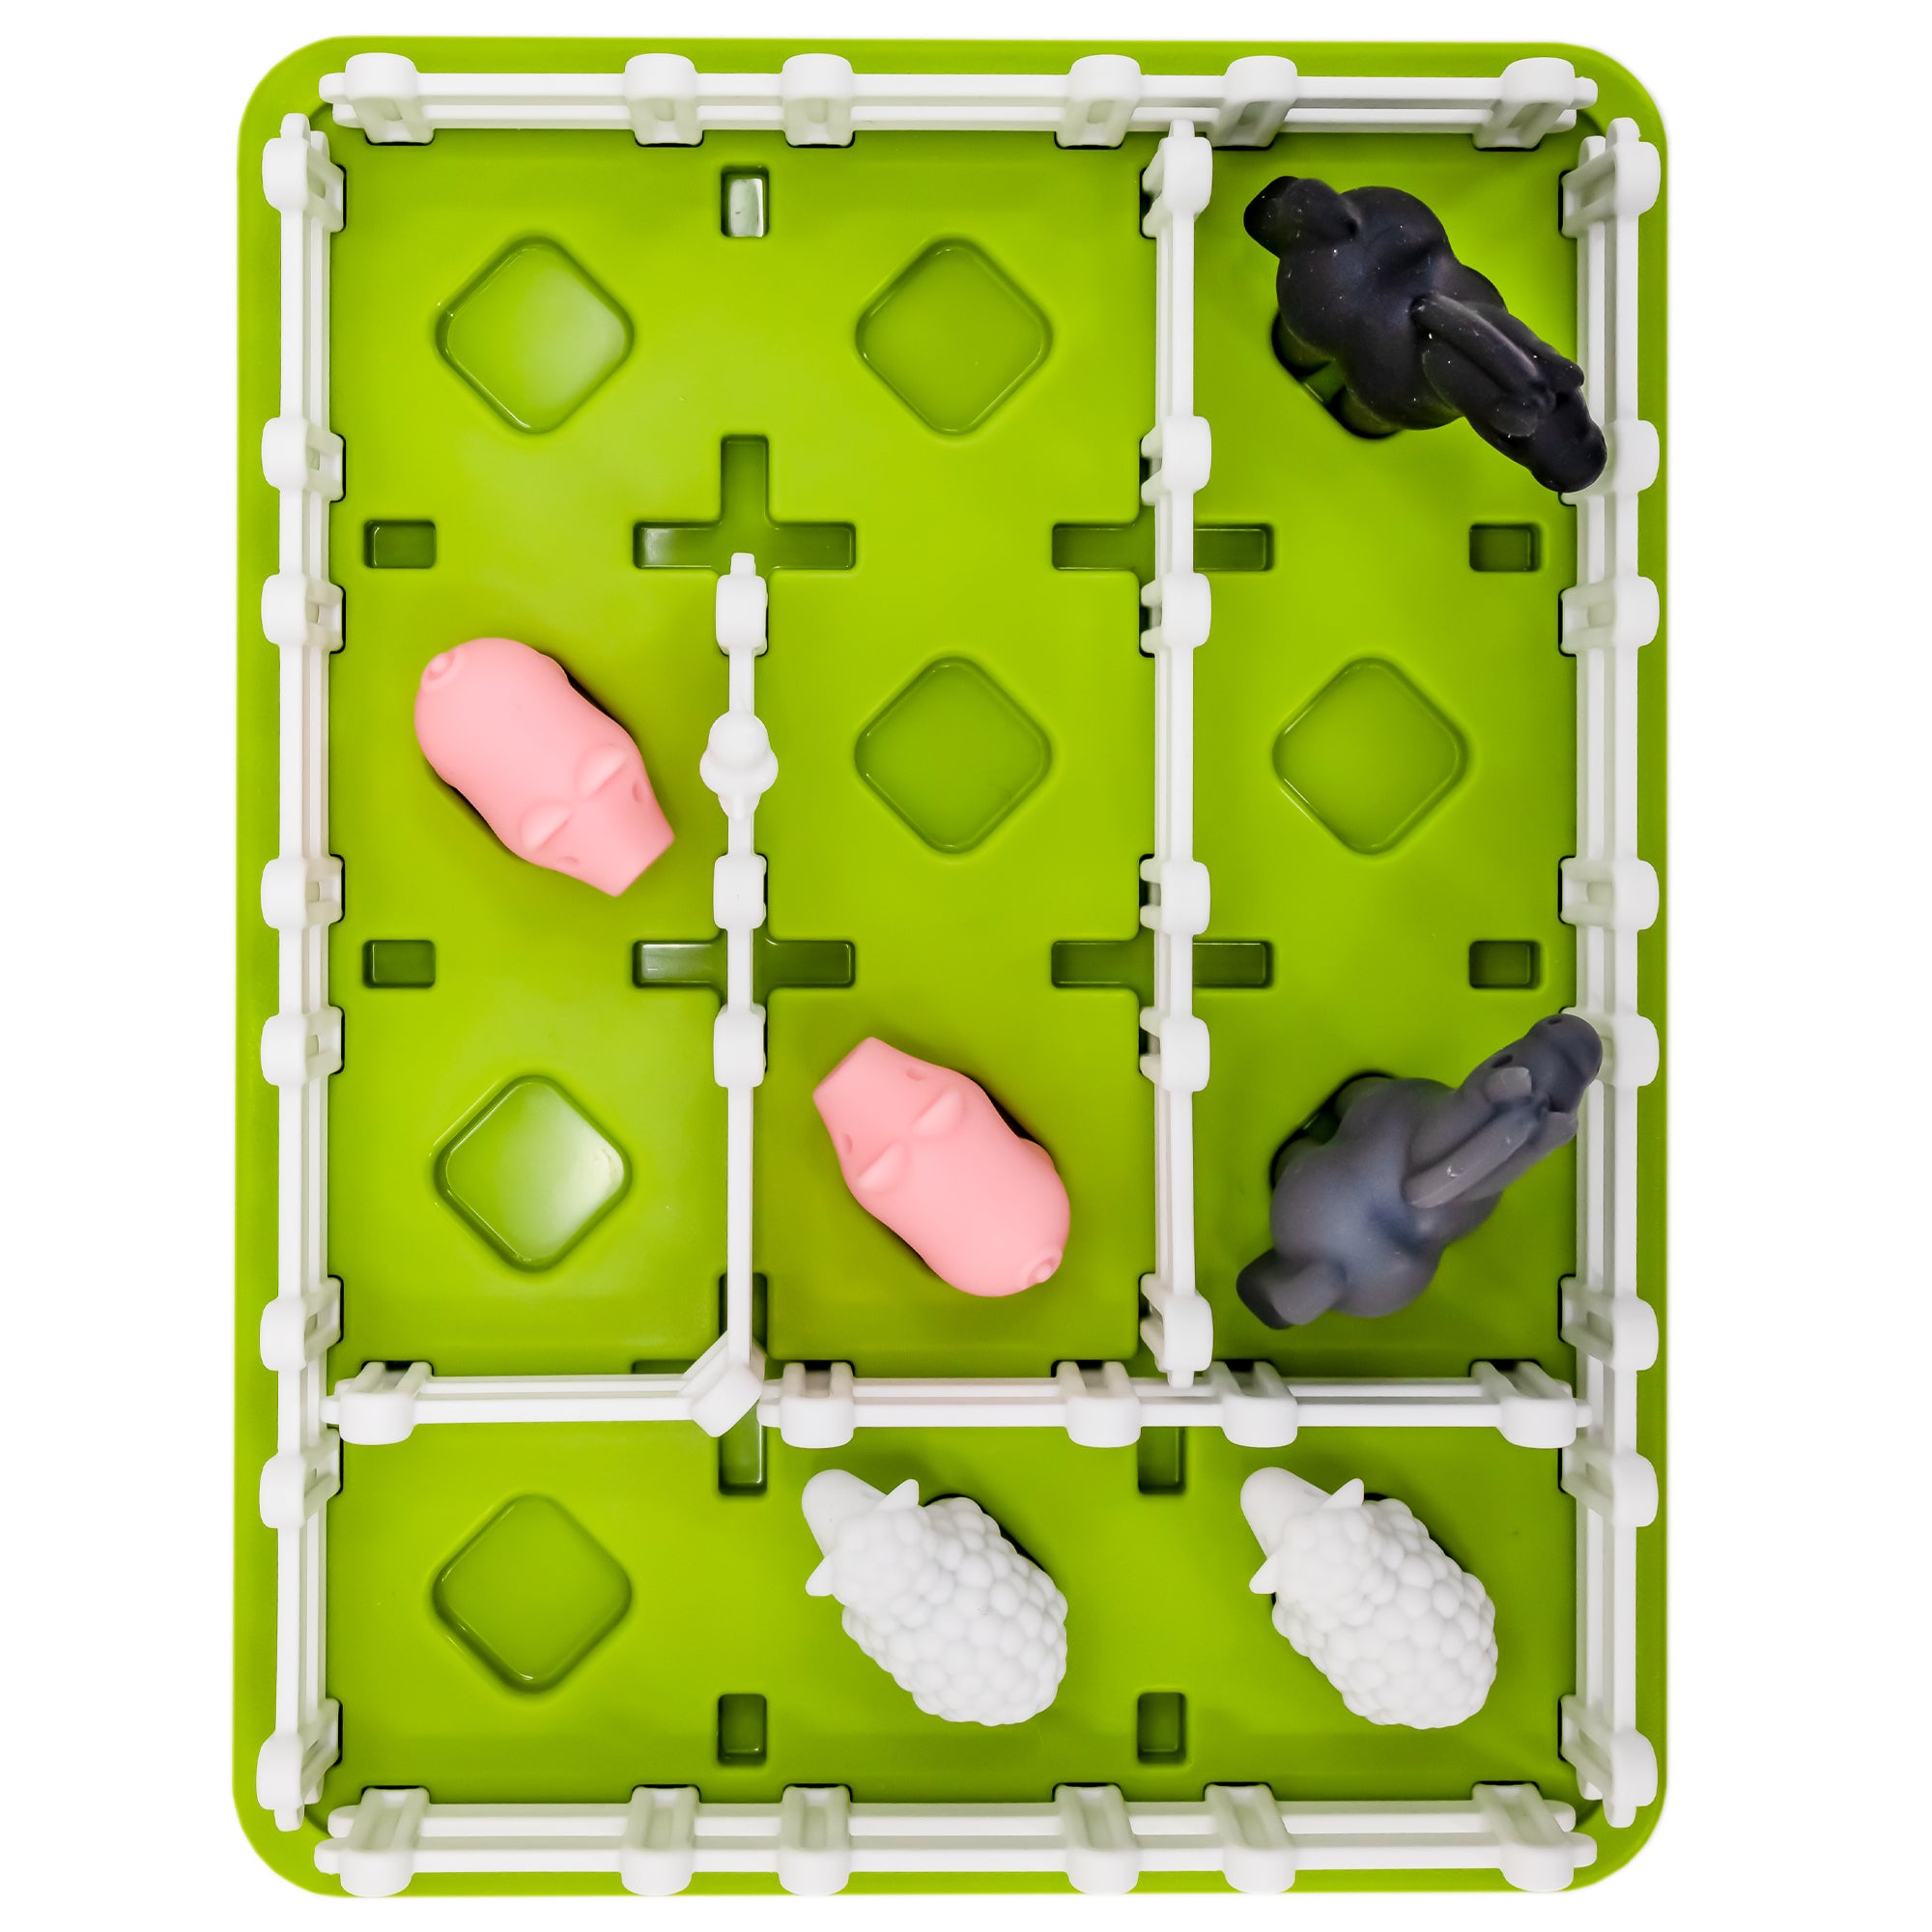 A shot from above of the Smart Farmer game. The game board is green and rectangle-shaped with white fence pieces all around the edge and a few placed in the middle. There are 2 pigs, 2 sheep, and 2 horses pieces on the board inside the fence.